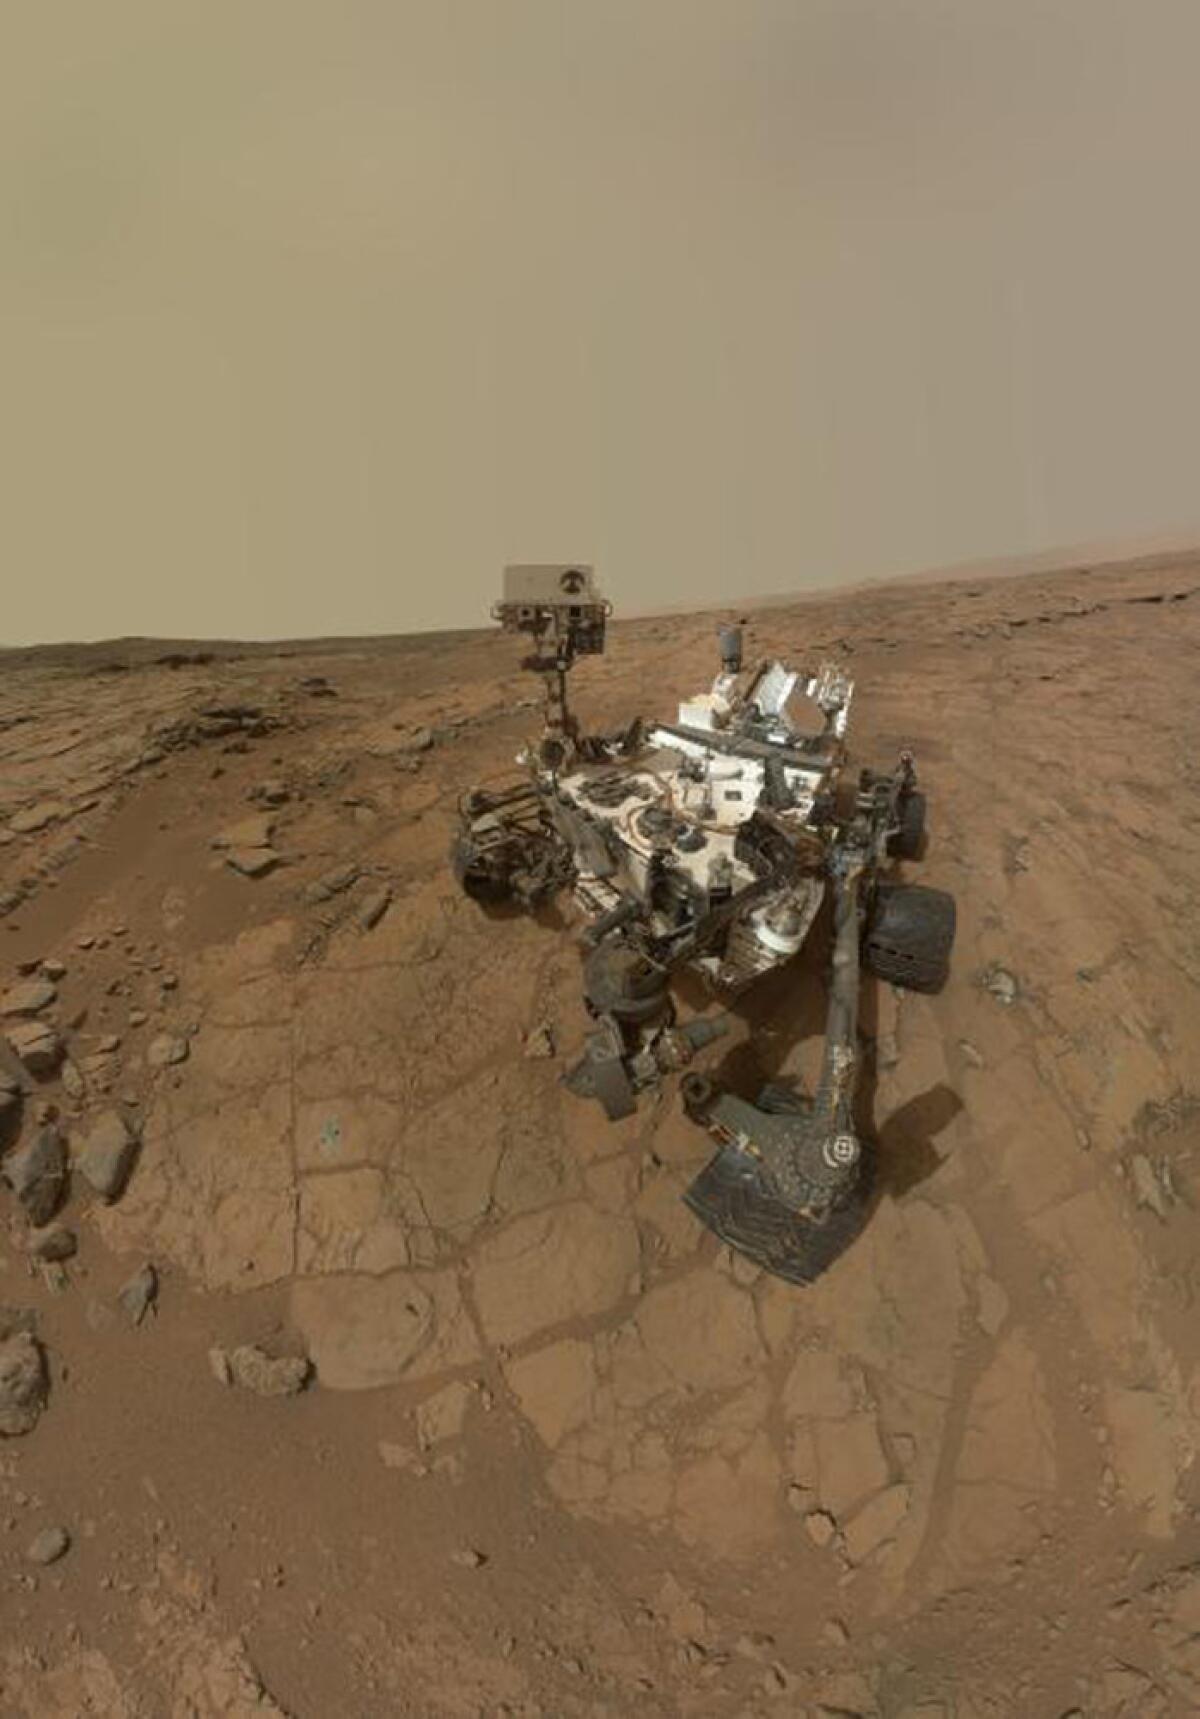 This self-portrait of NASA's Mars rover Curiosity obtained May 22, 2013 combines dozens of exposures taken by the rover's Mars Hand Lens Imager (MAHLI) during the 177th Martian day, or sol, of Curiosity's work on Mars (February 3, 2013), plus three exposures taken during Sol 270 (May 10, 2013) to update the appearance of part of the ground beside the rover. The updated area, which is in the lower left quadrant of the image, shows gray-powder and two holes where Curiosity used its drill on the rock target "John Klein." The portion has been spliced into a self-portrait that was prepared and released in February (PIA16764), before the use of the drill. The result shows what the site where the self-portrait was taken looked like by the time the rover was ready to drive away from that site in May 2013. The rover's robotic arm is not visible in the mosaic. MAHLI, which took the component images for this mosaic, is mounted on a turret at the end of the arm. Wrist motions and turret rotations on the arm allowed MAHLI to acquire the mosaic's component images. The arm was positioned out of the shot in the images, or portions of images, used in the mosaic.